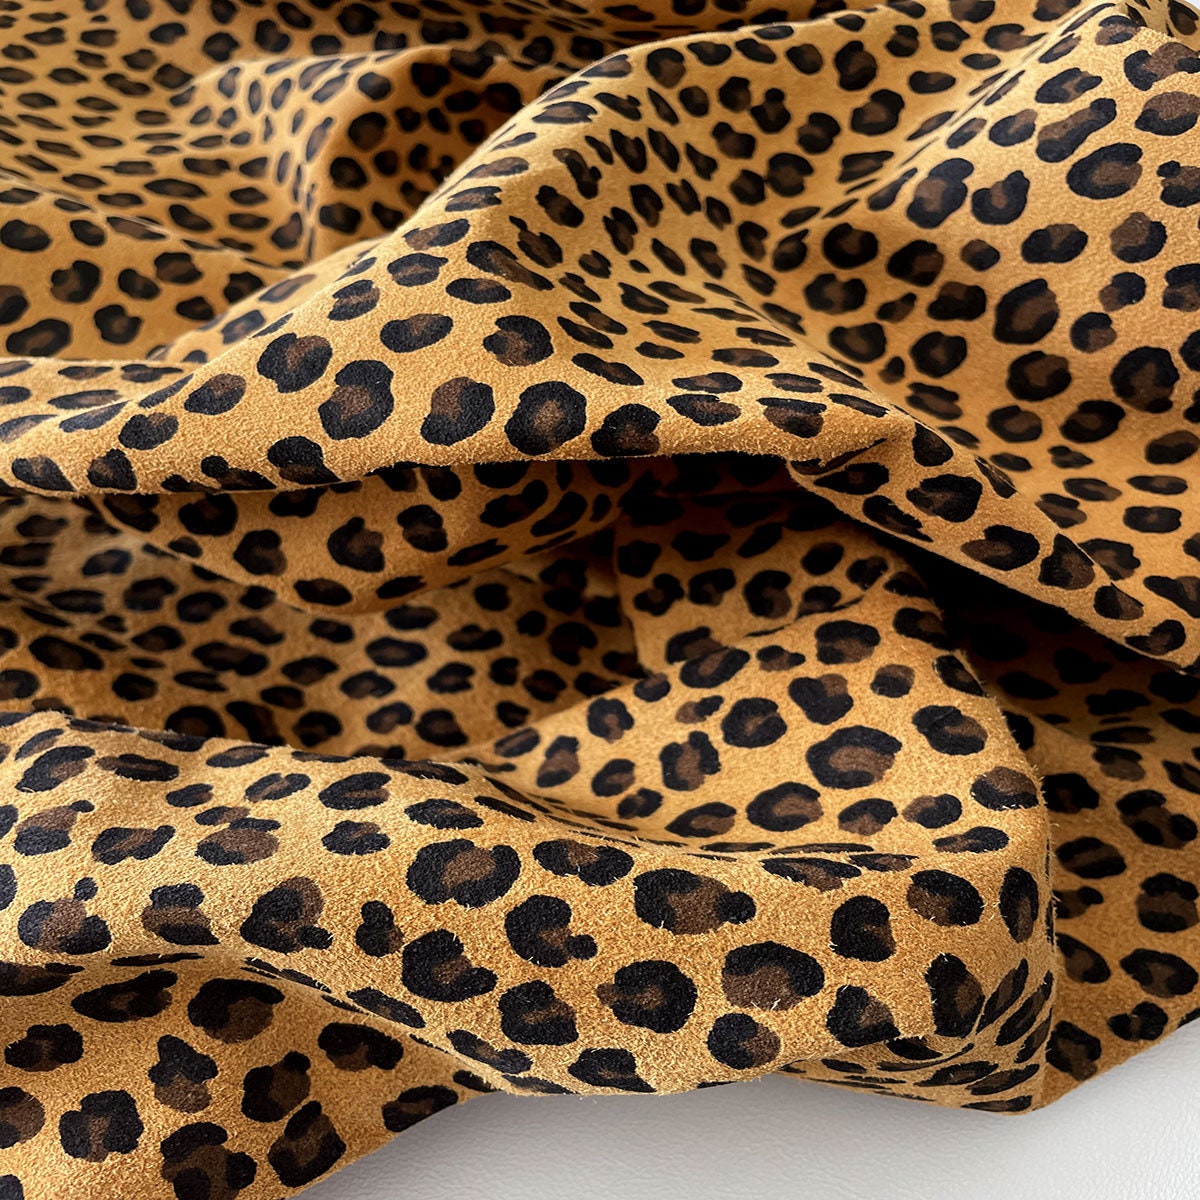 Camel Leopard Print Suede Leather Hide, Printed Leather, Leather Supplier,  Leather skins for Shoemaking, Bag making, Upholstery